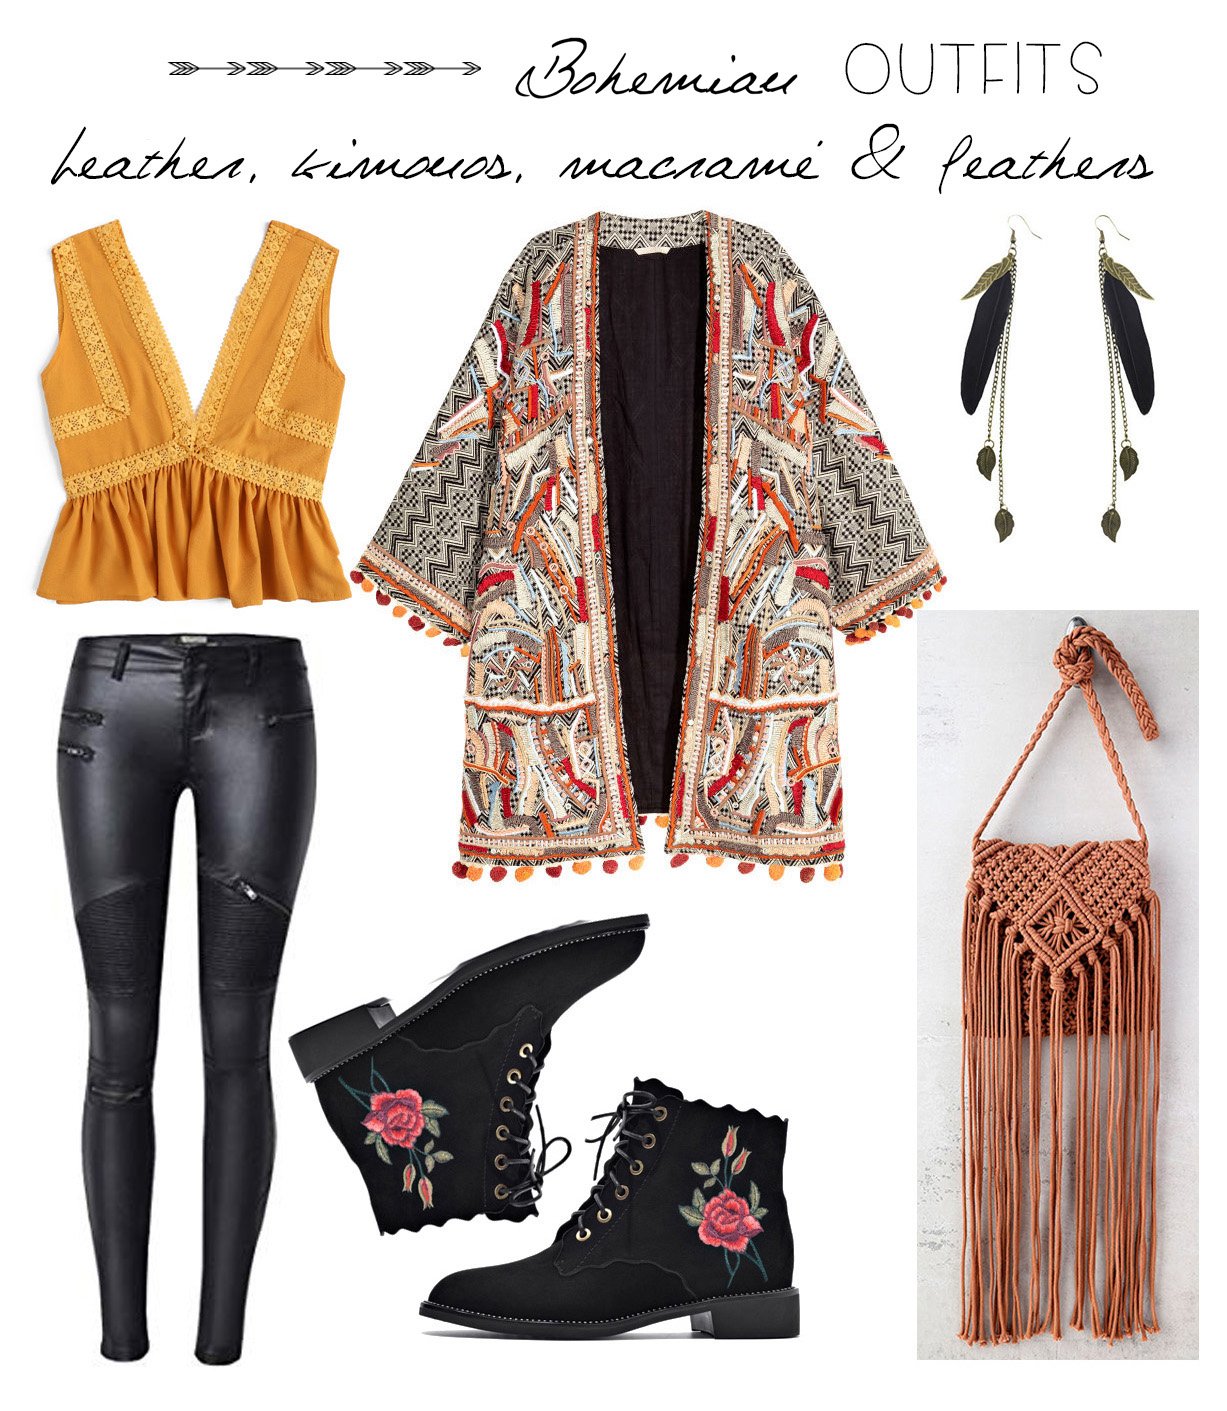 Want To Take On The Bohemian Style? Here's How To Rock It